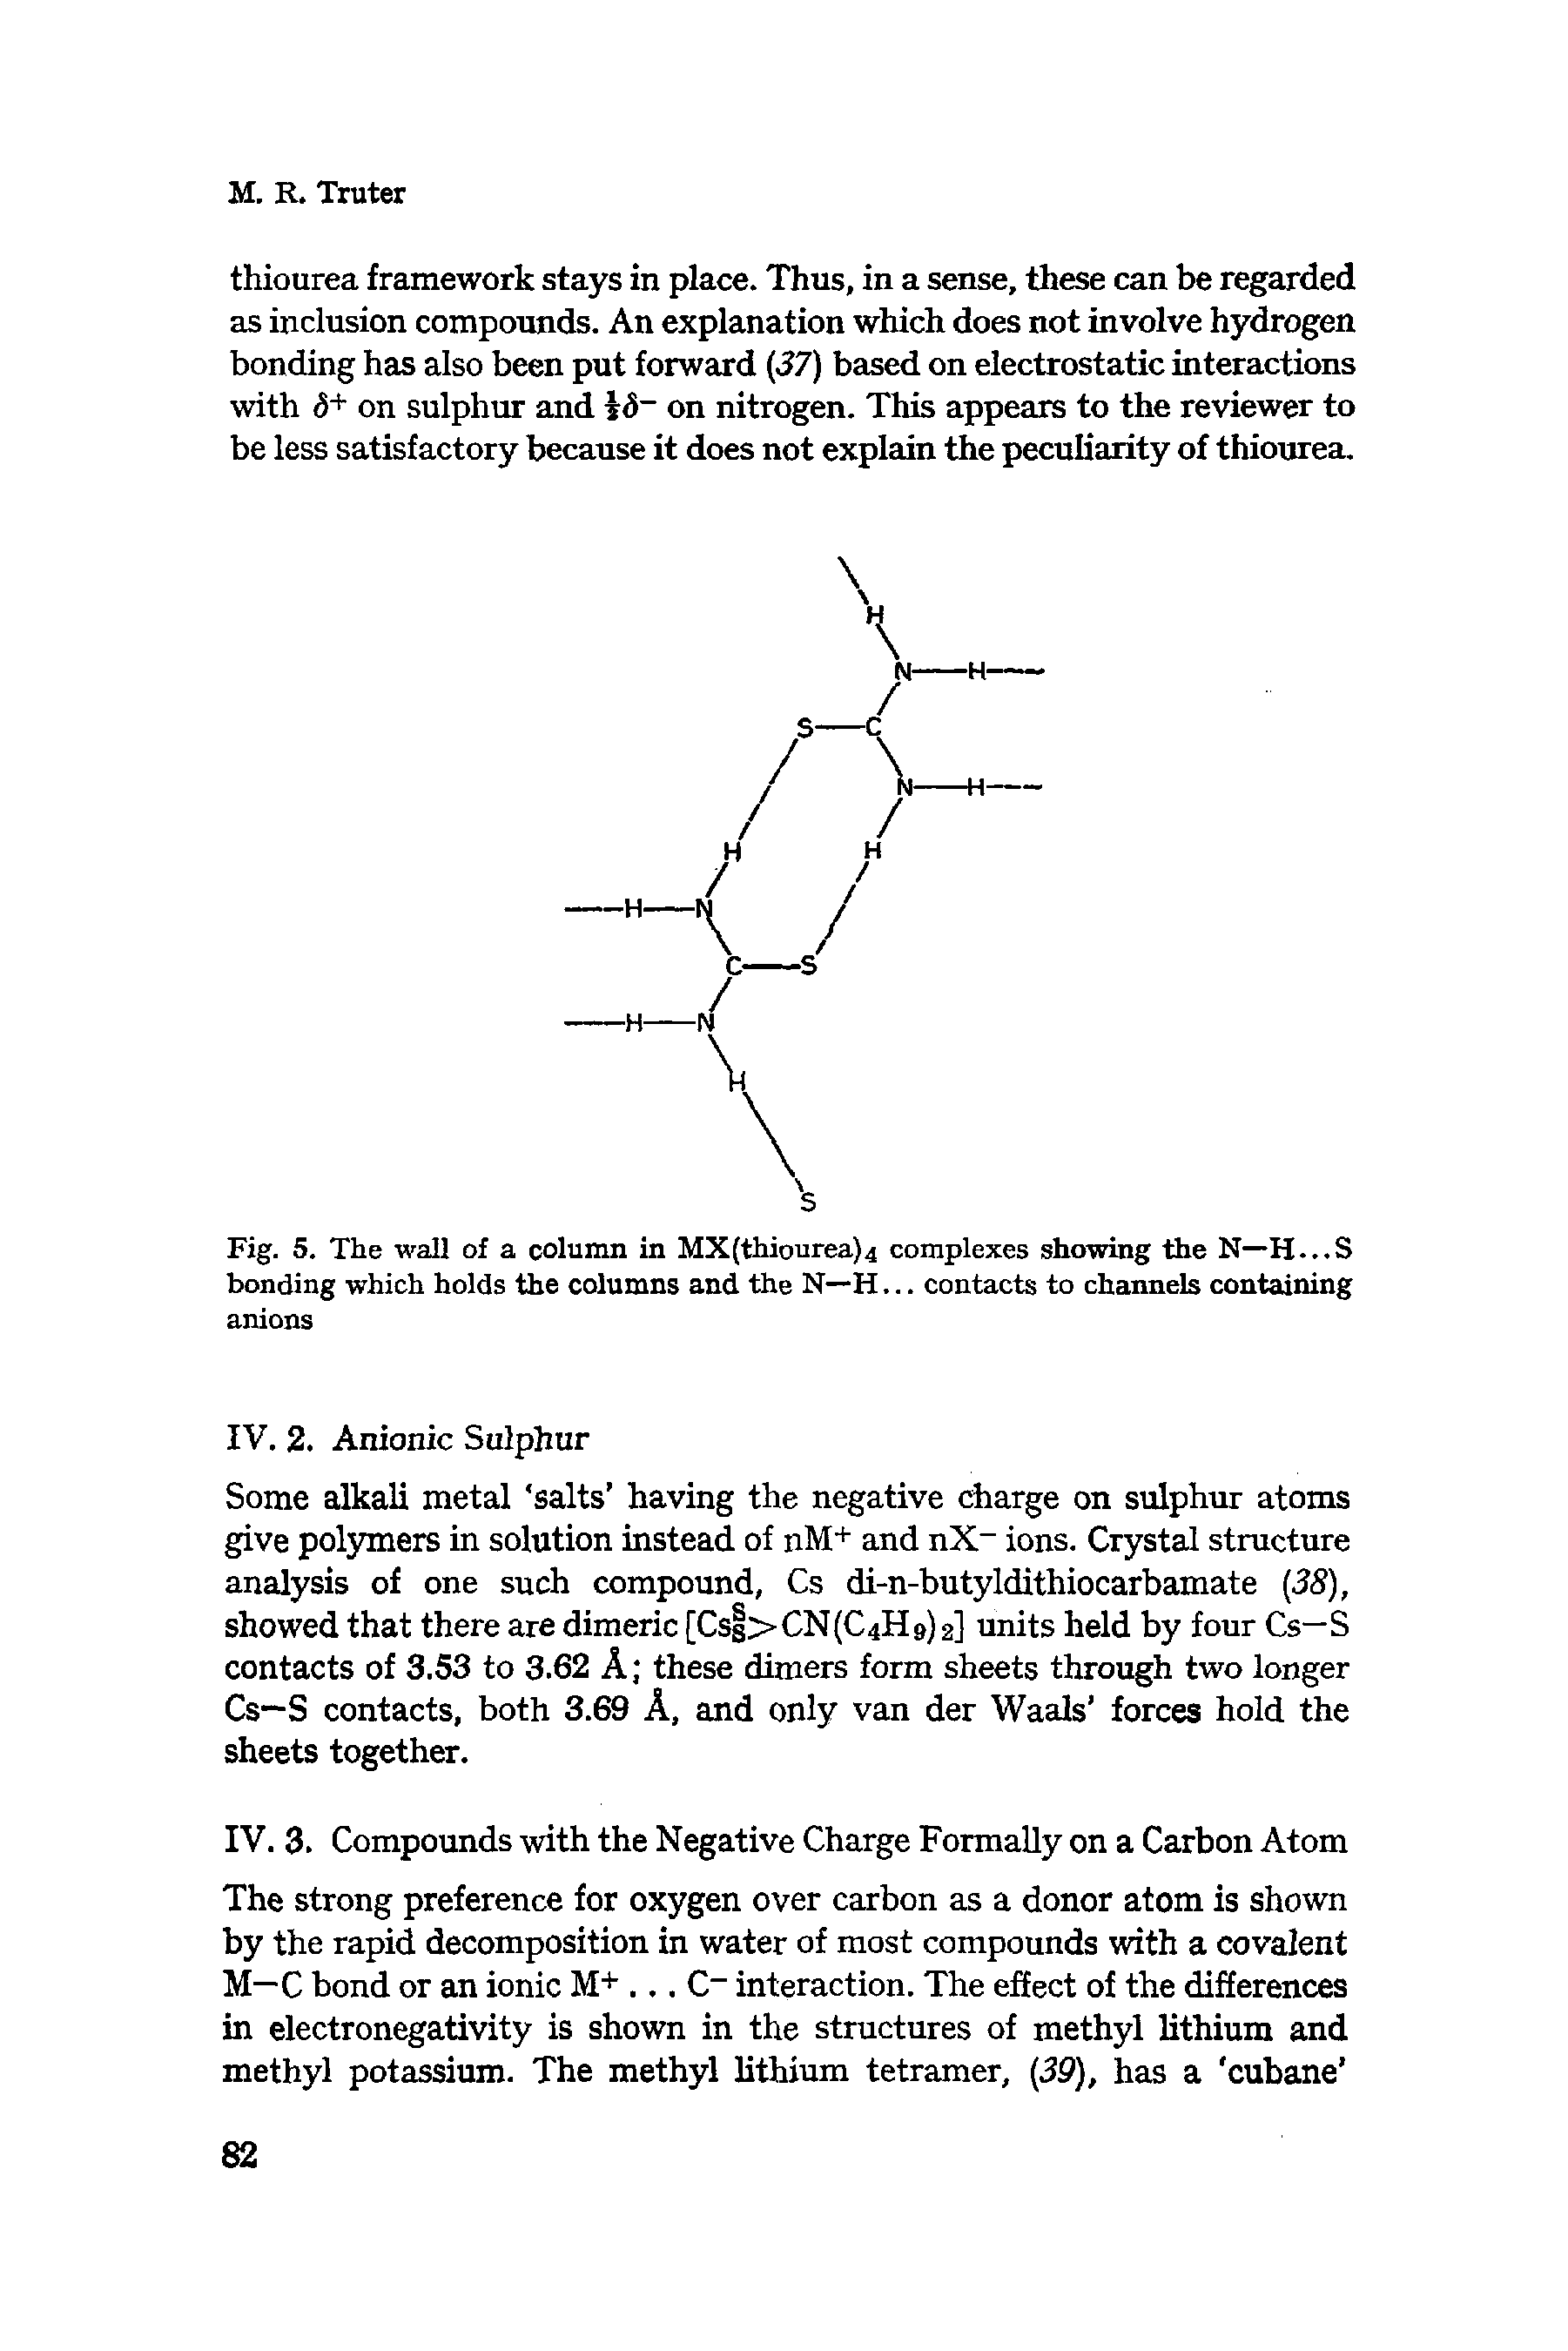 Fig. 5. The wall of a column in MX(thiourea)4 complexes showing the N—H...S bonding which holds the columns and the N—H... contacts to channels containing anions...